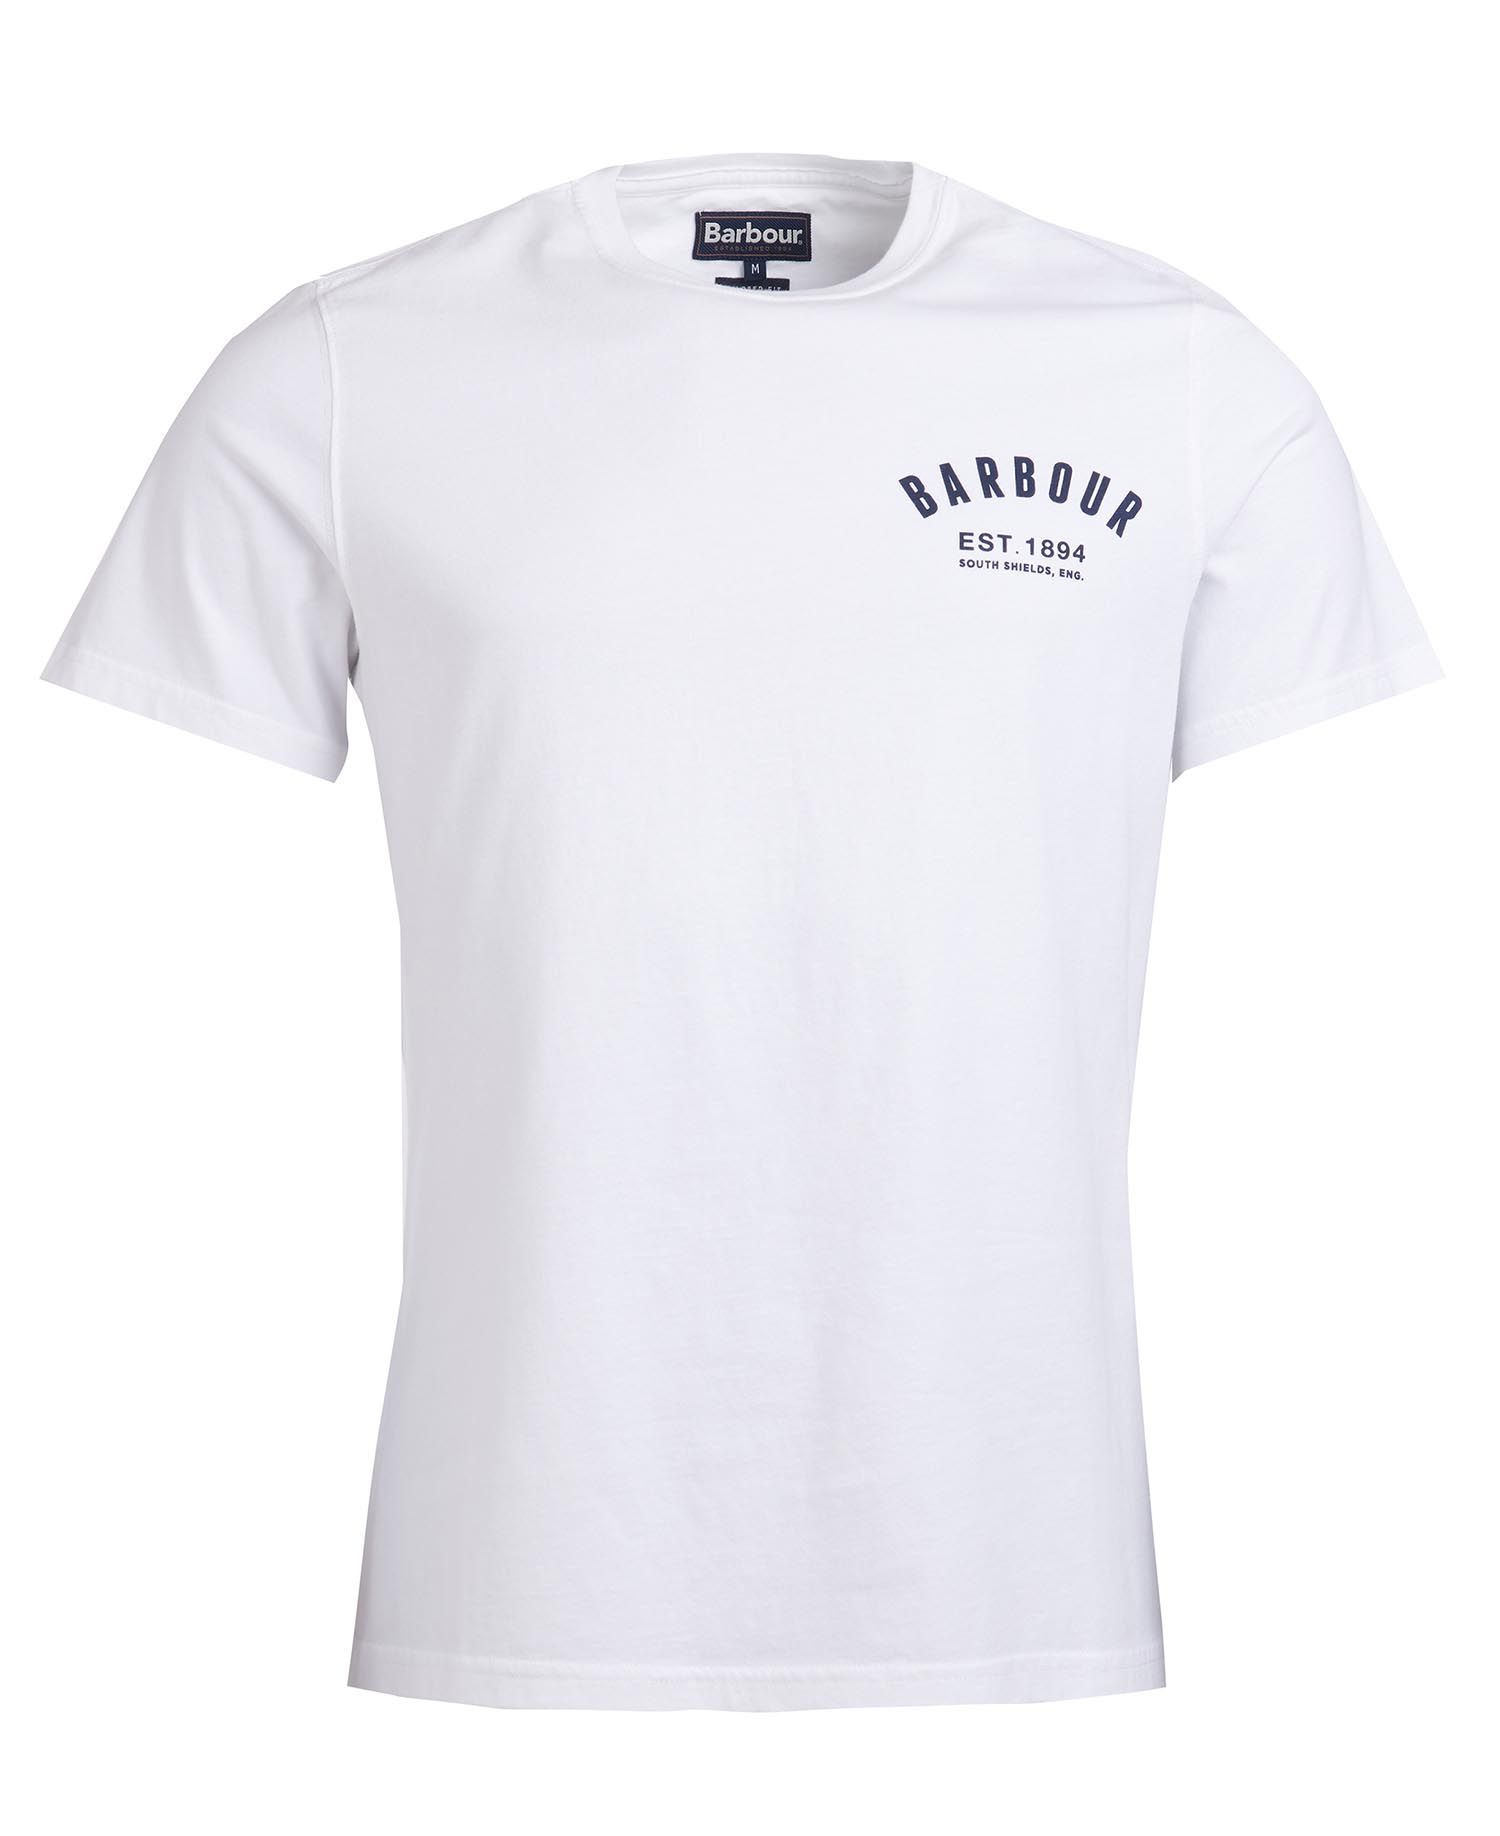 Barbour Barbour Preppy T-shirt Tee White